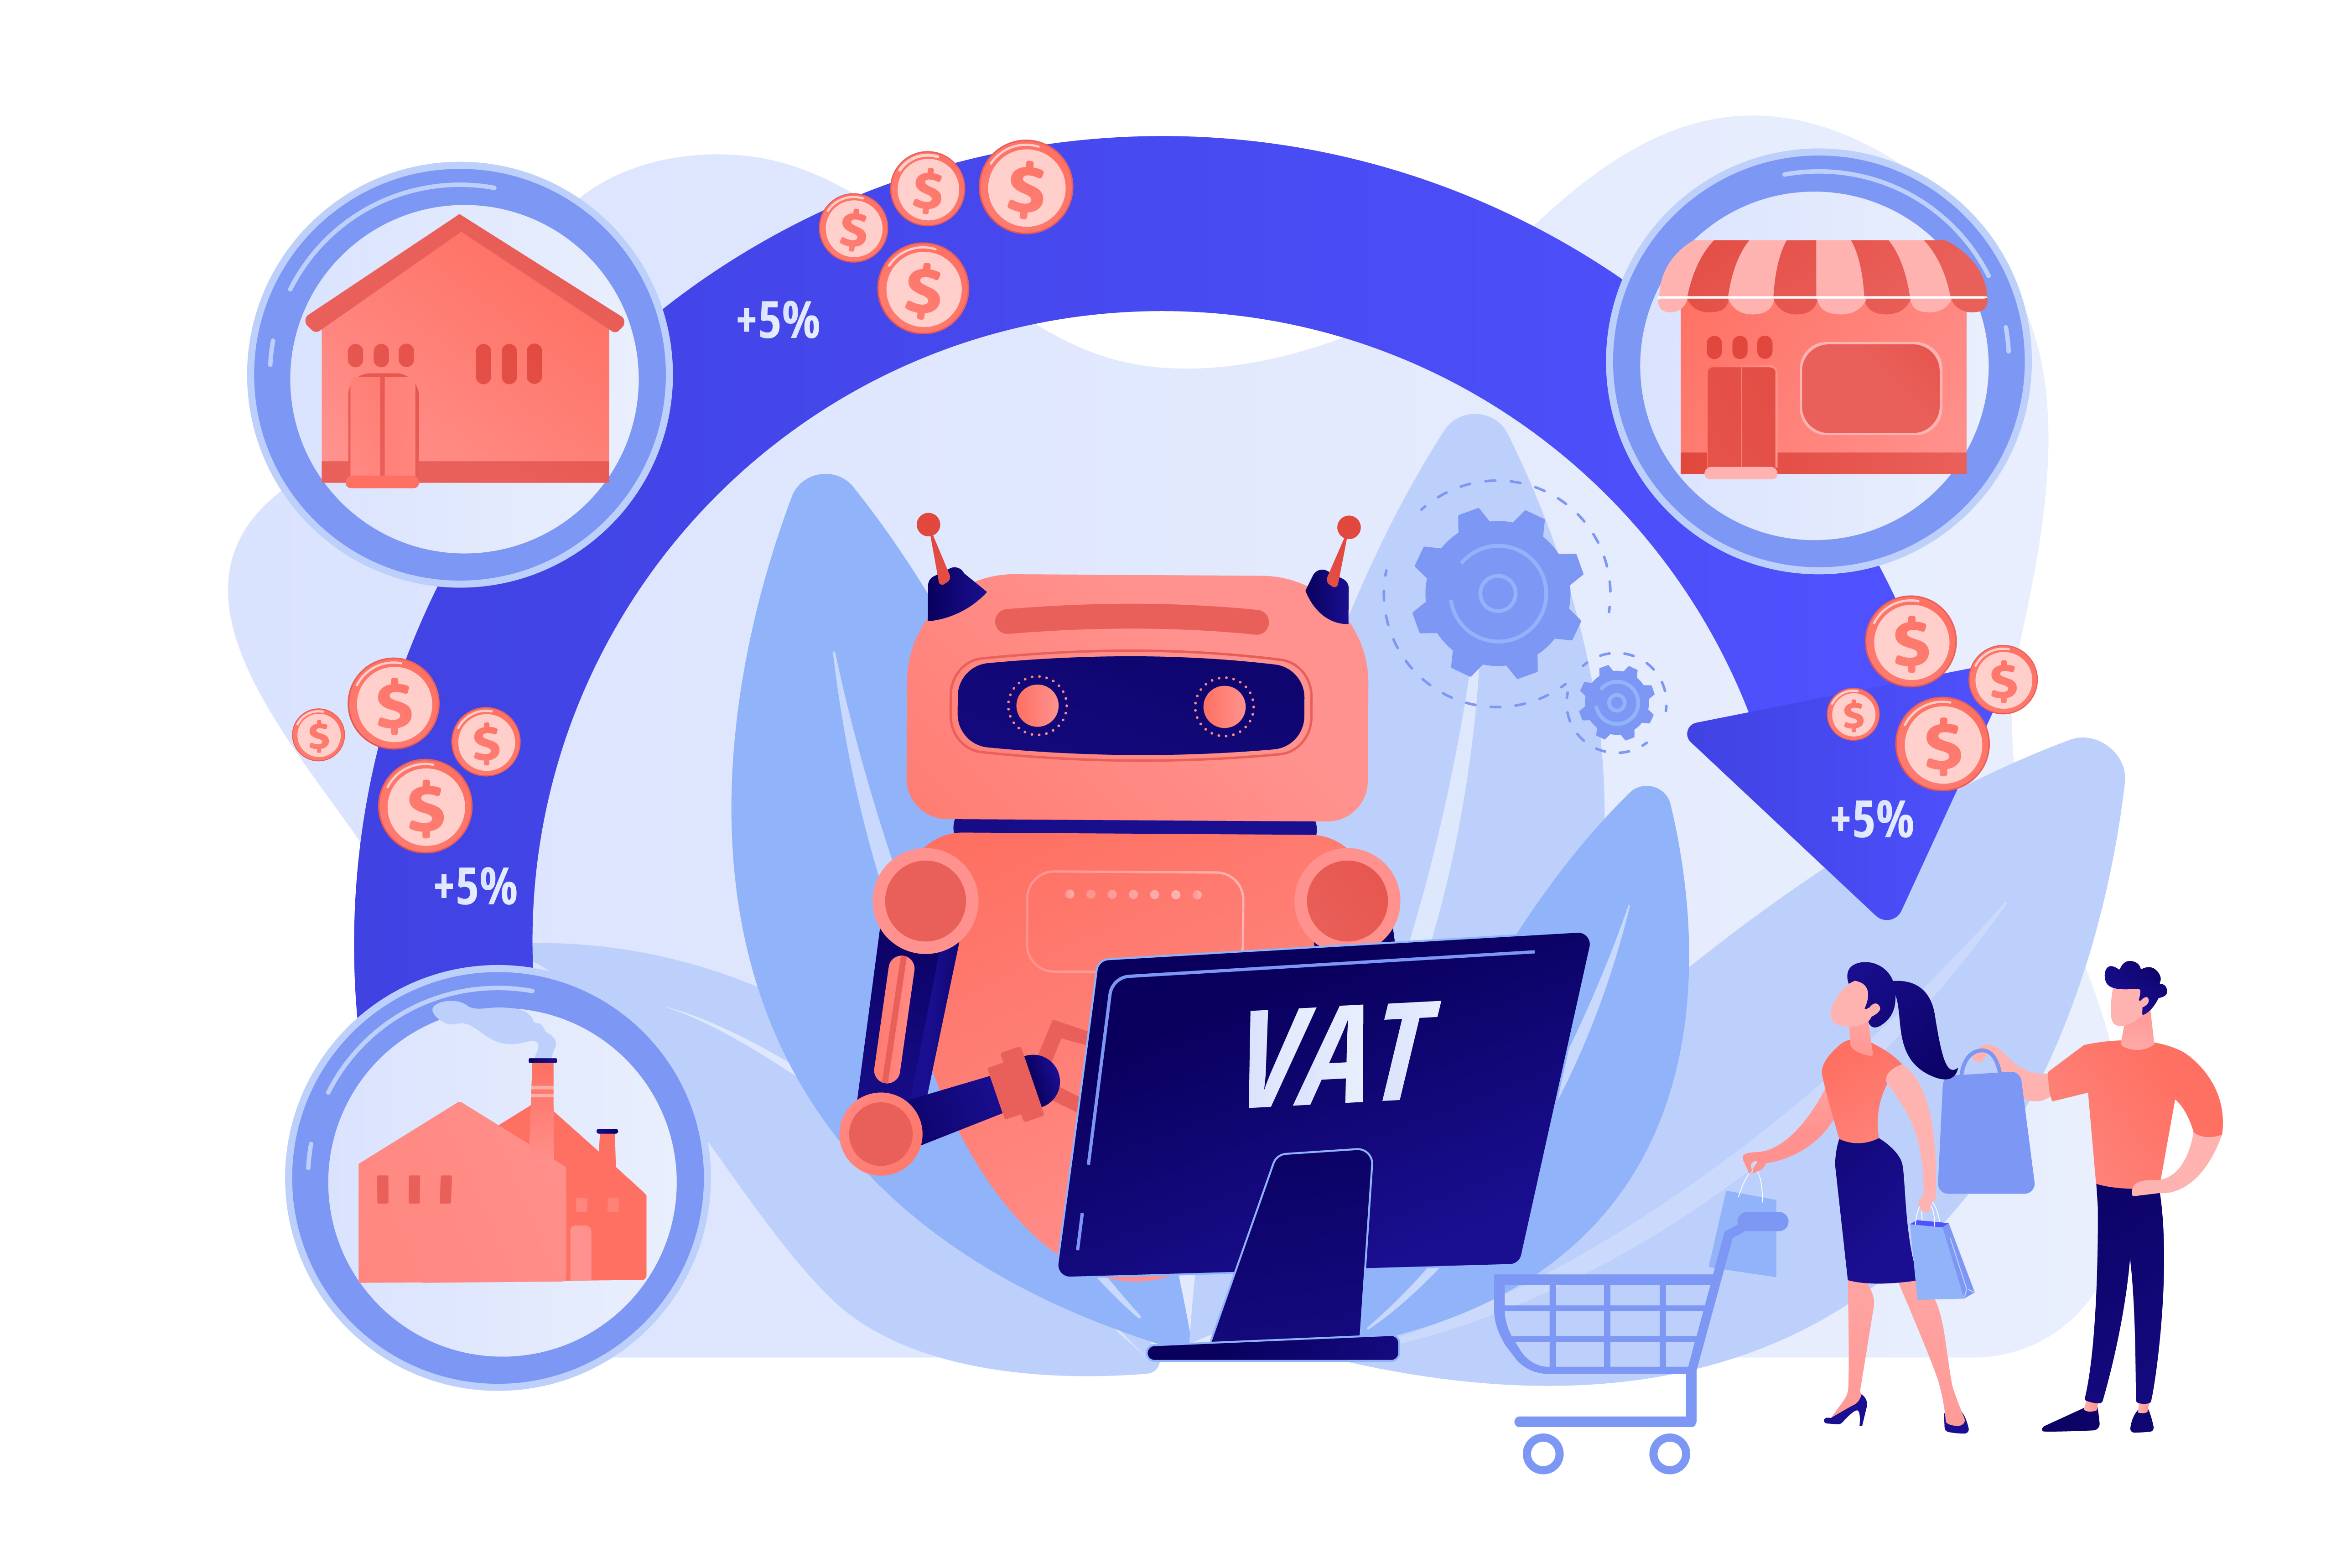 Artificial intelligence, ai calculating taxation multiplier. Value added tax system, VAT number validation, global taxation control concept. Pinkish coral bluevector isolated illustration